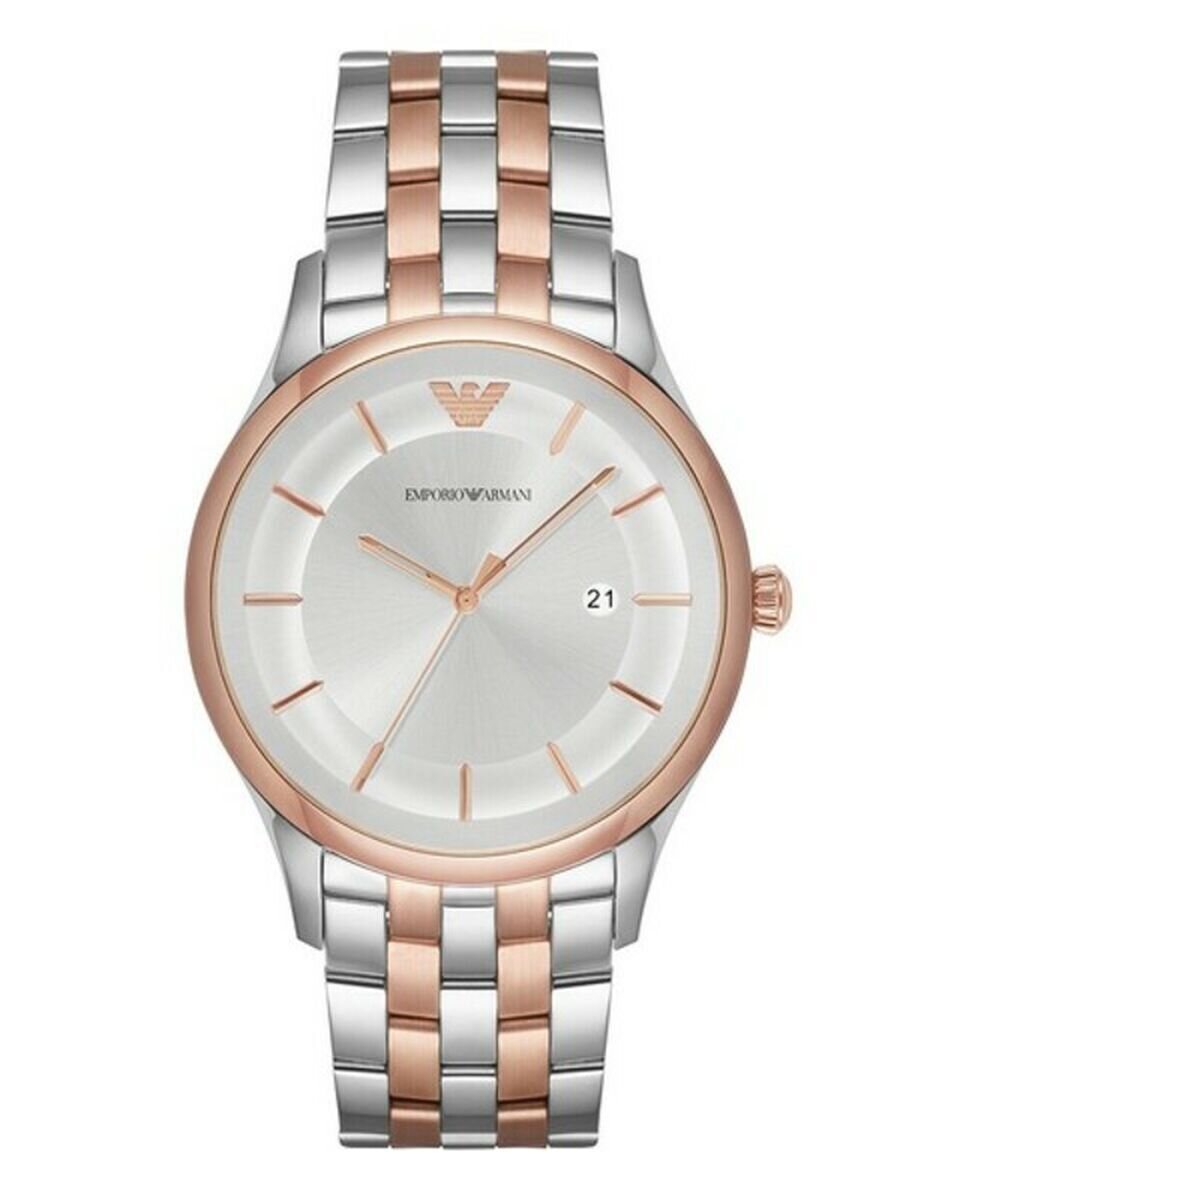 Men's two tone silver and rose gold quartz watch